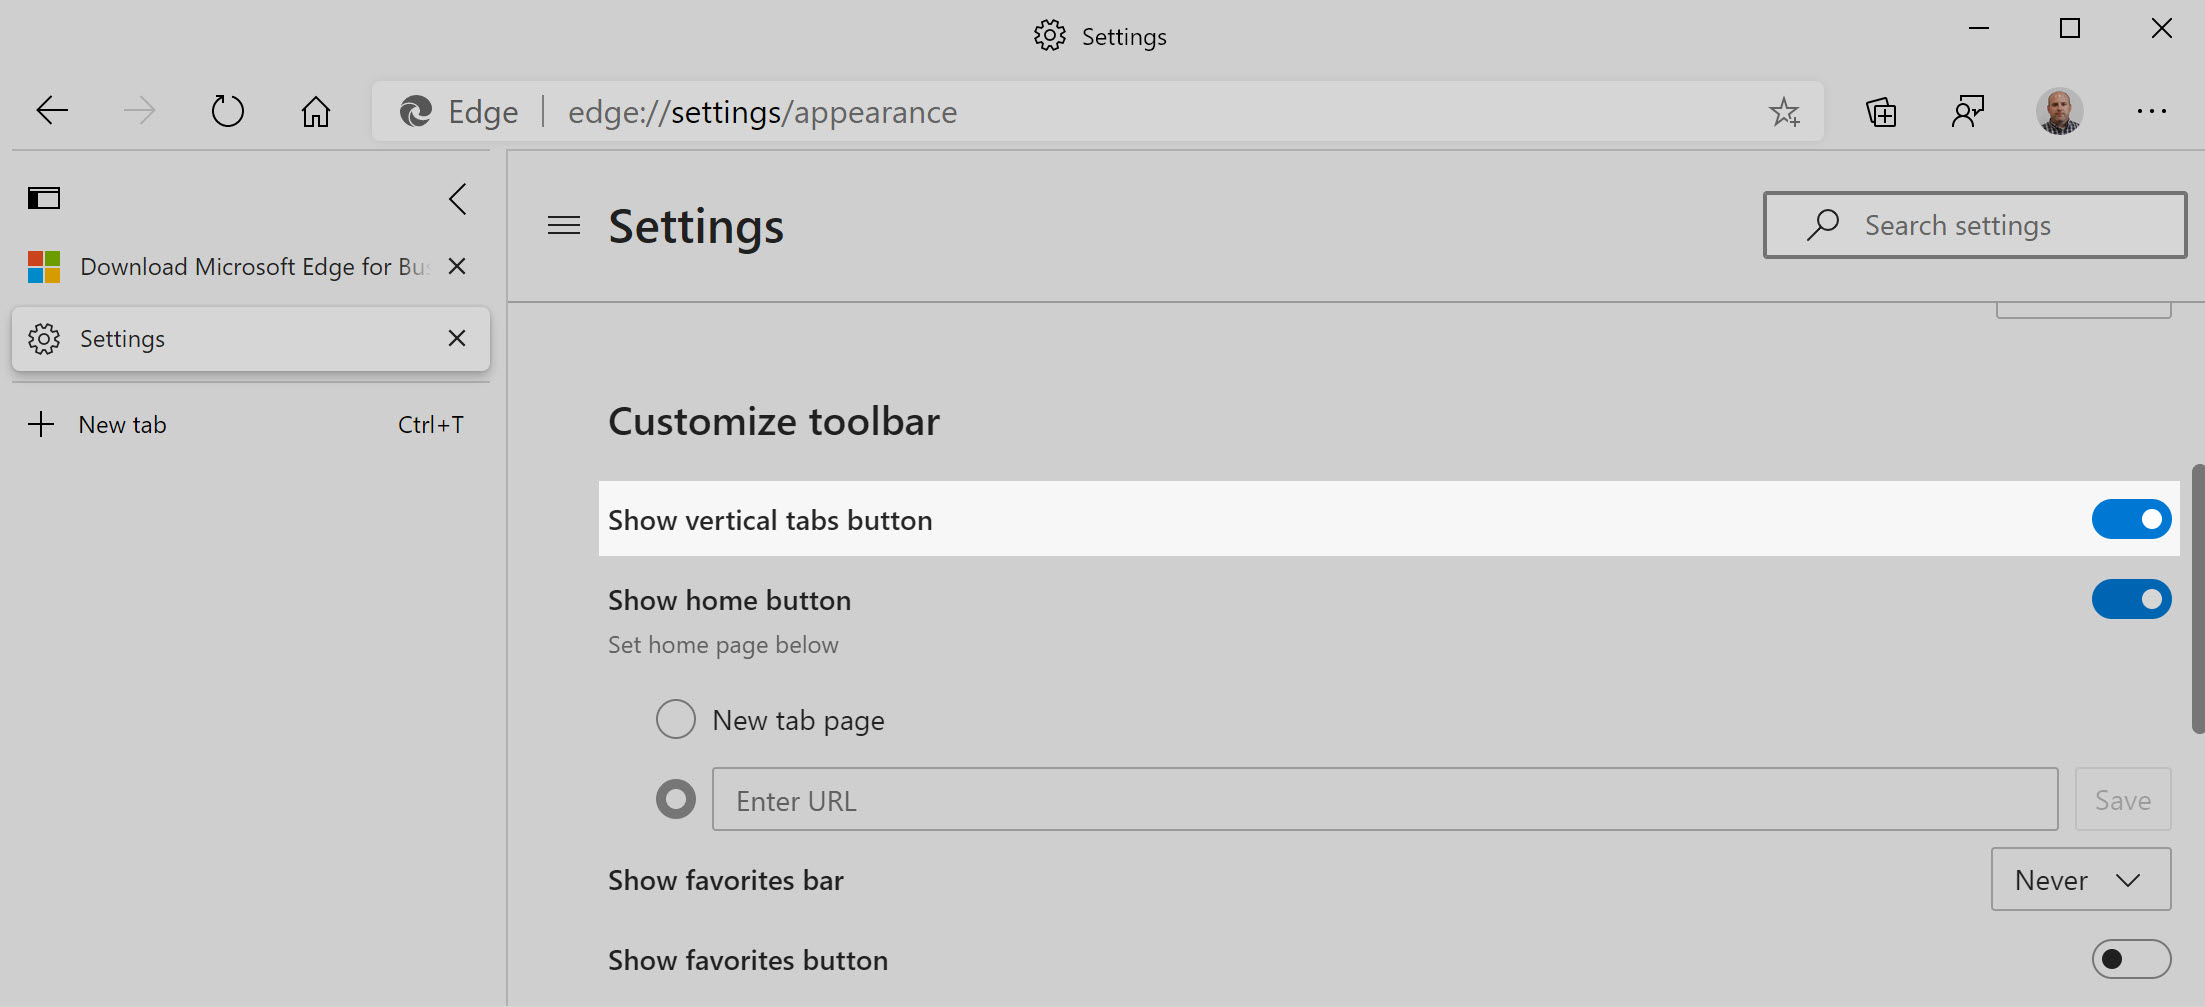 How To Show Or Hide The Vertical Tabs Button In The Microsoft Edge - Vrogue